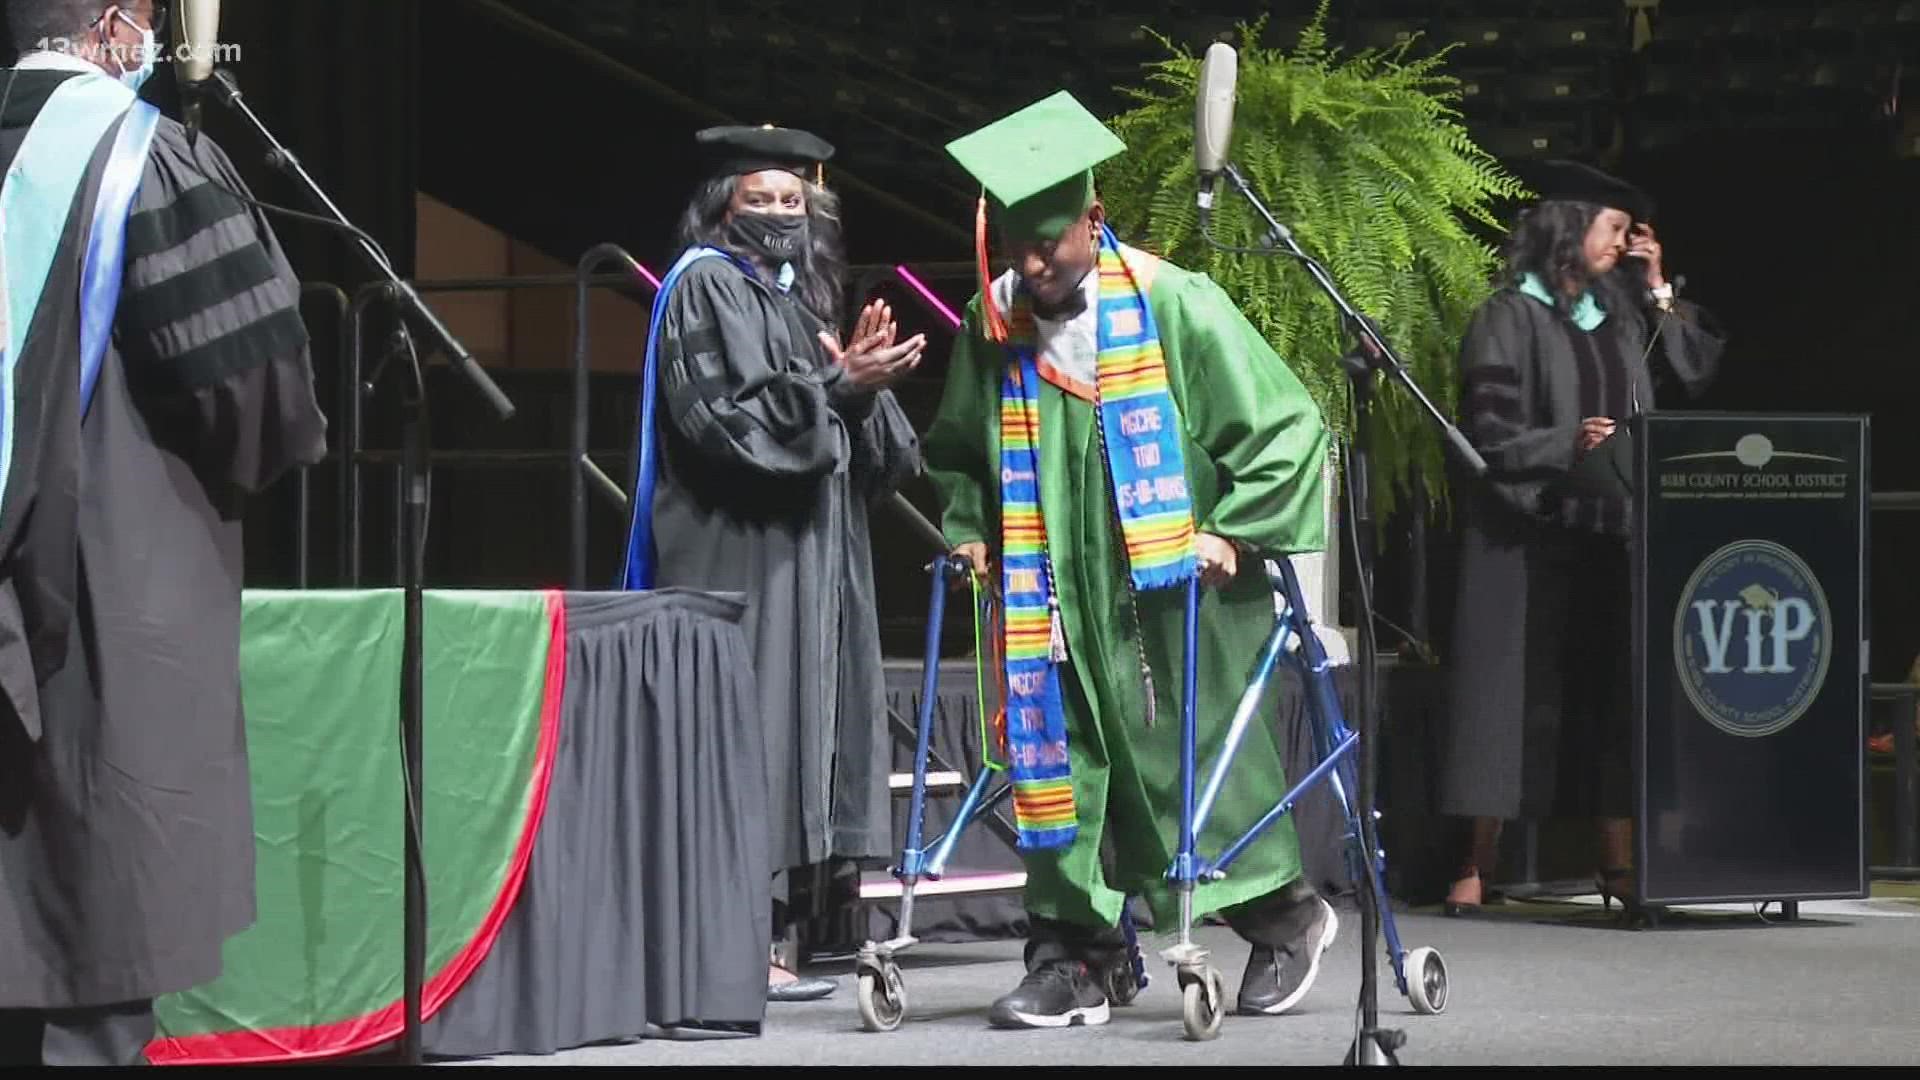 One Bibb high school senior worked for years to walk across the stage, shake their principal's hand, and finally hold their diploma -- the walk was very rewarding